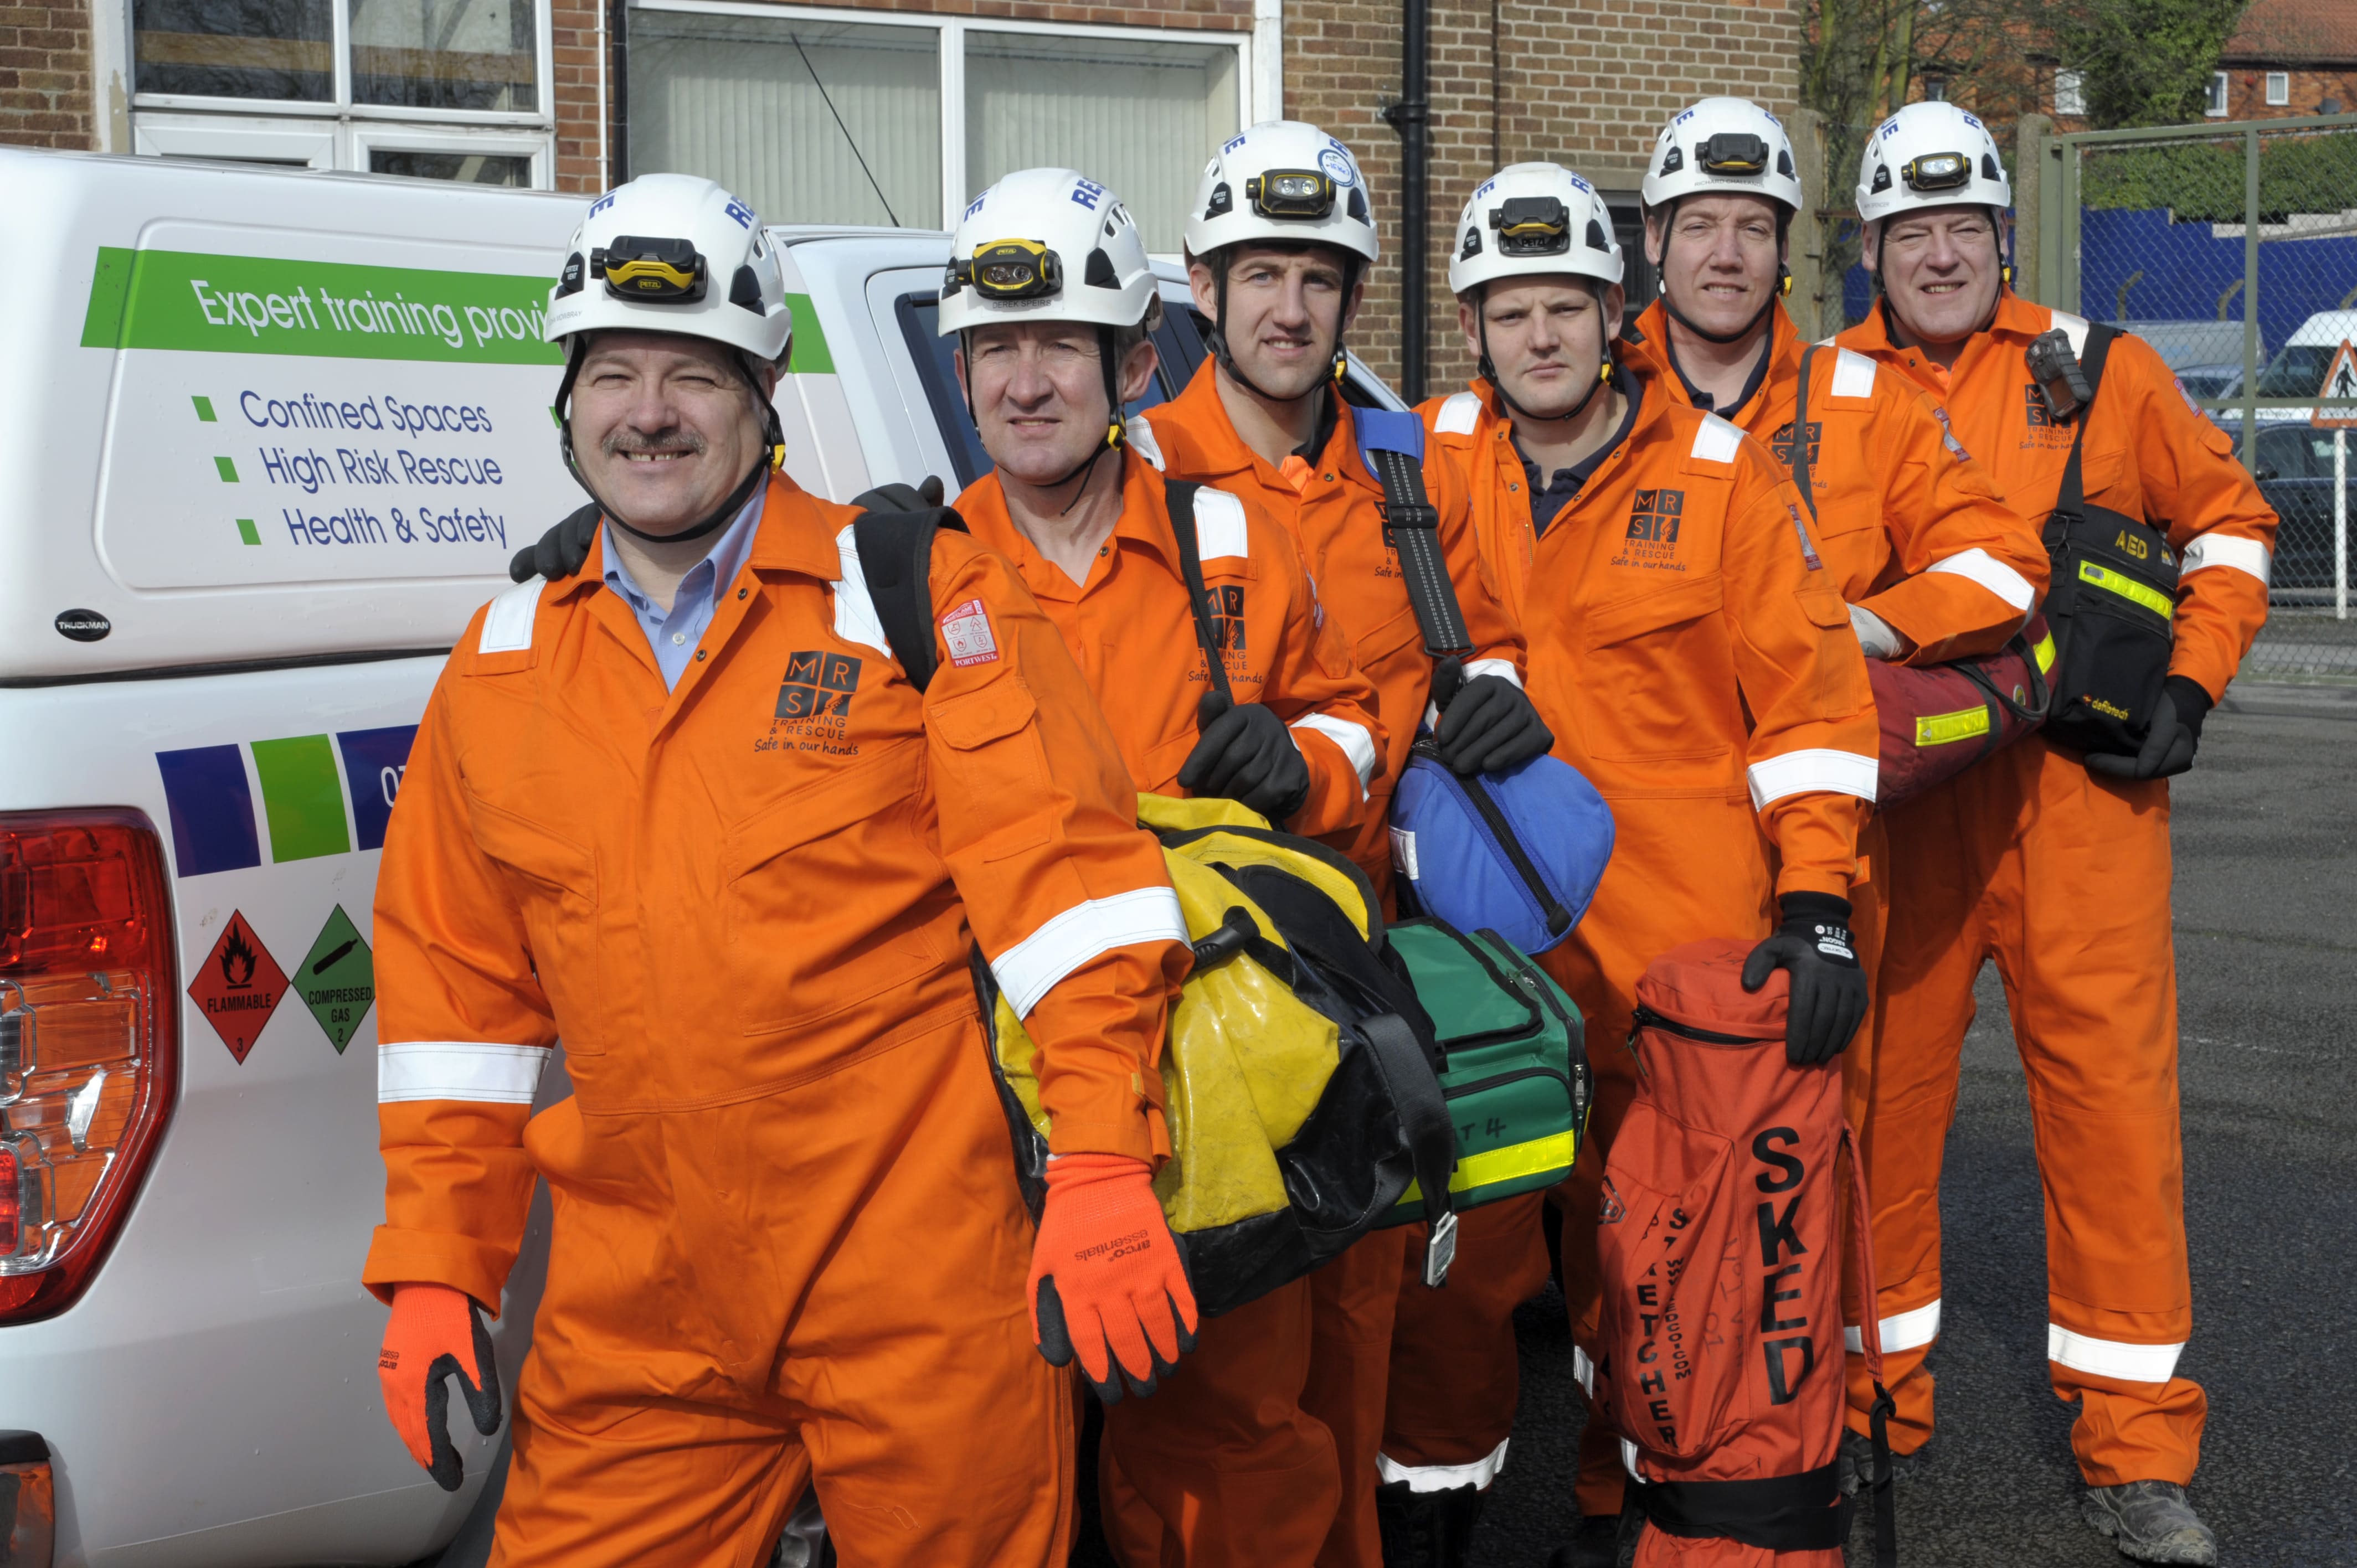 6 MRS Training & Rescue specialists, in uniform with hard hats and emergency rescue equipment